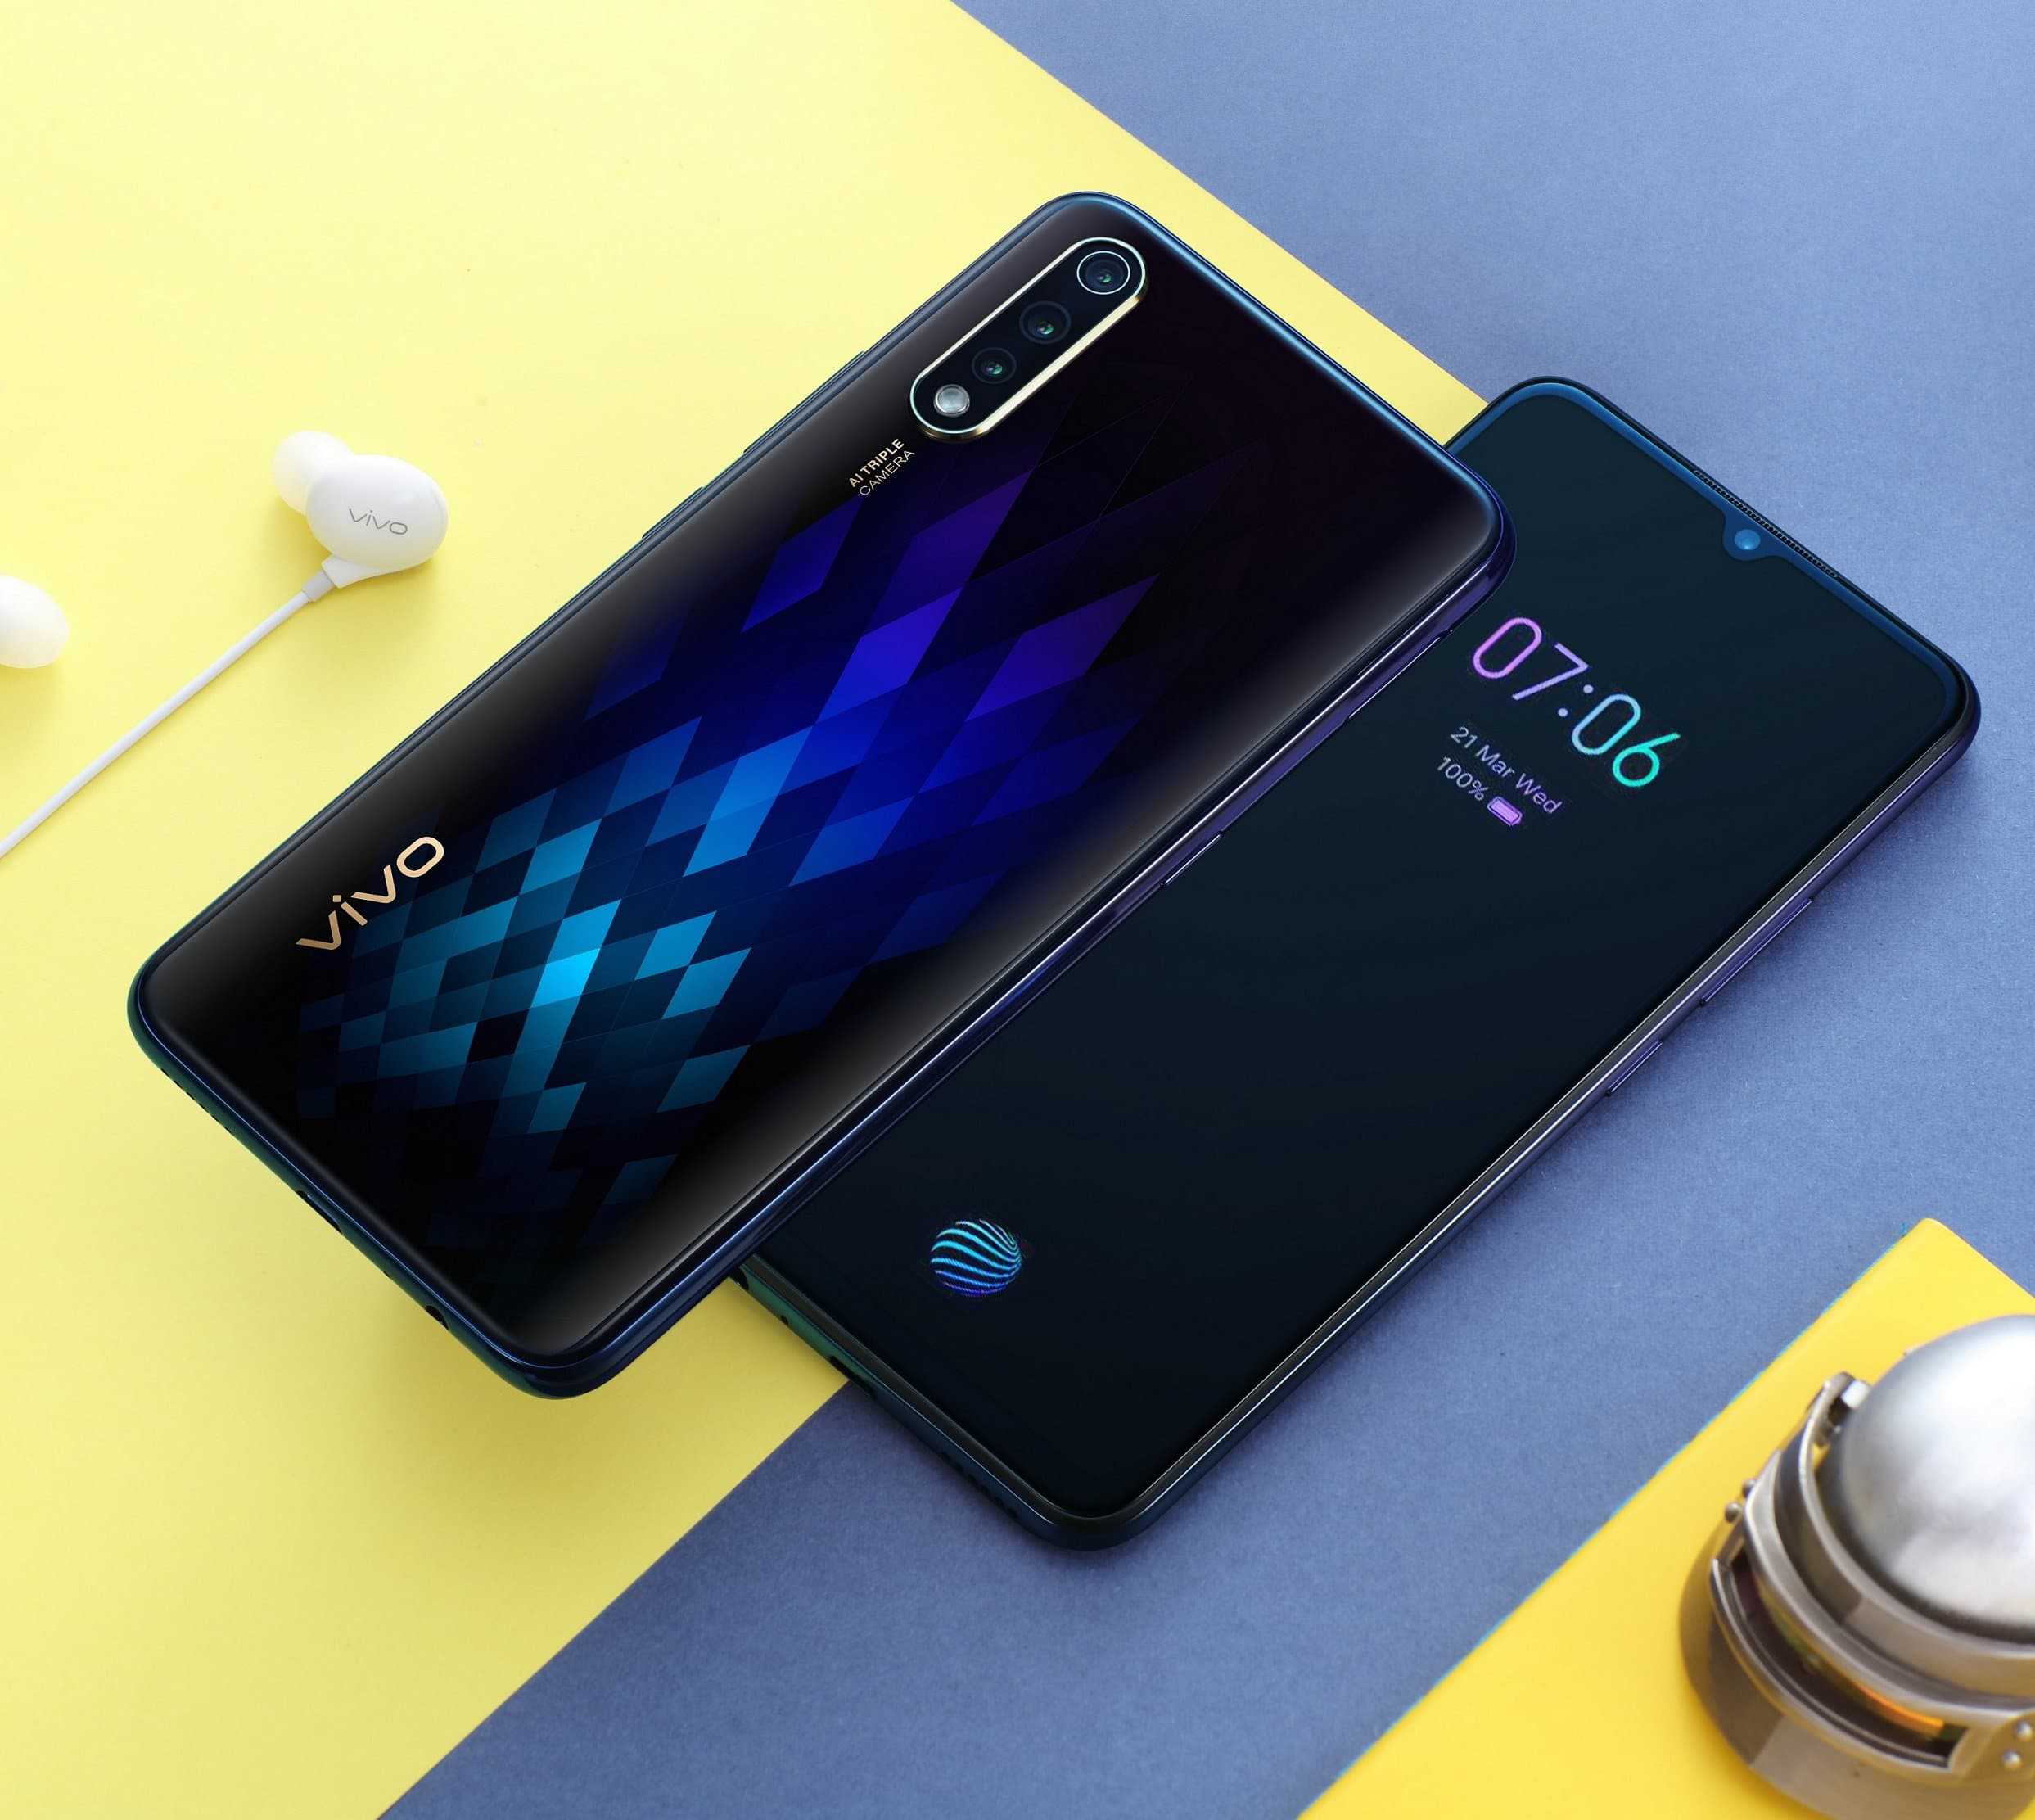 Vivo’s S1 smartphone is now available in UAE.